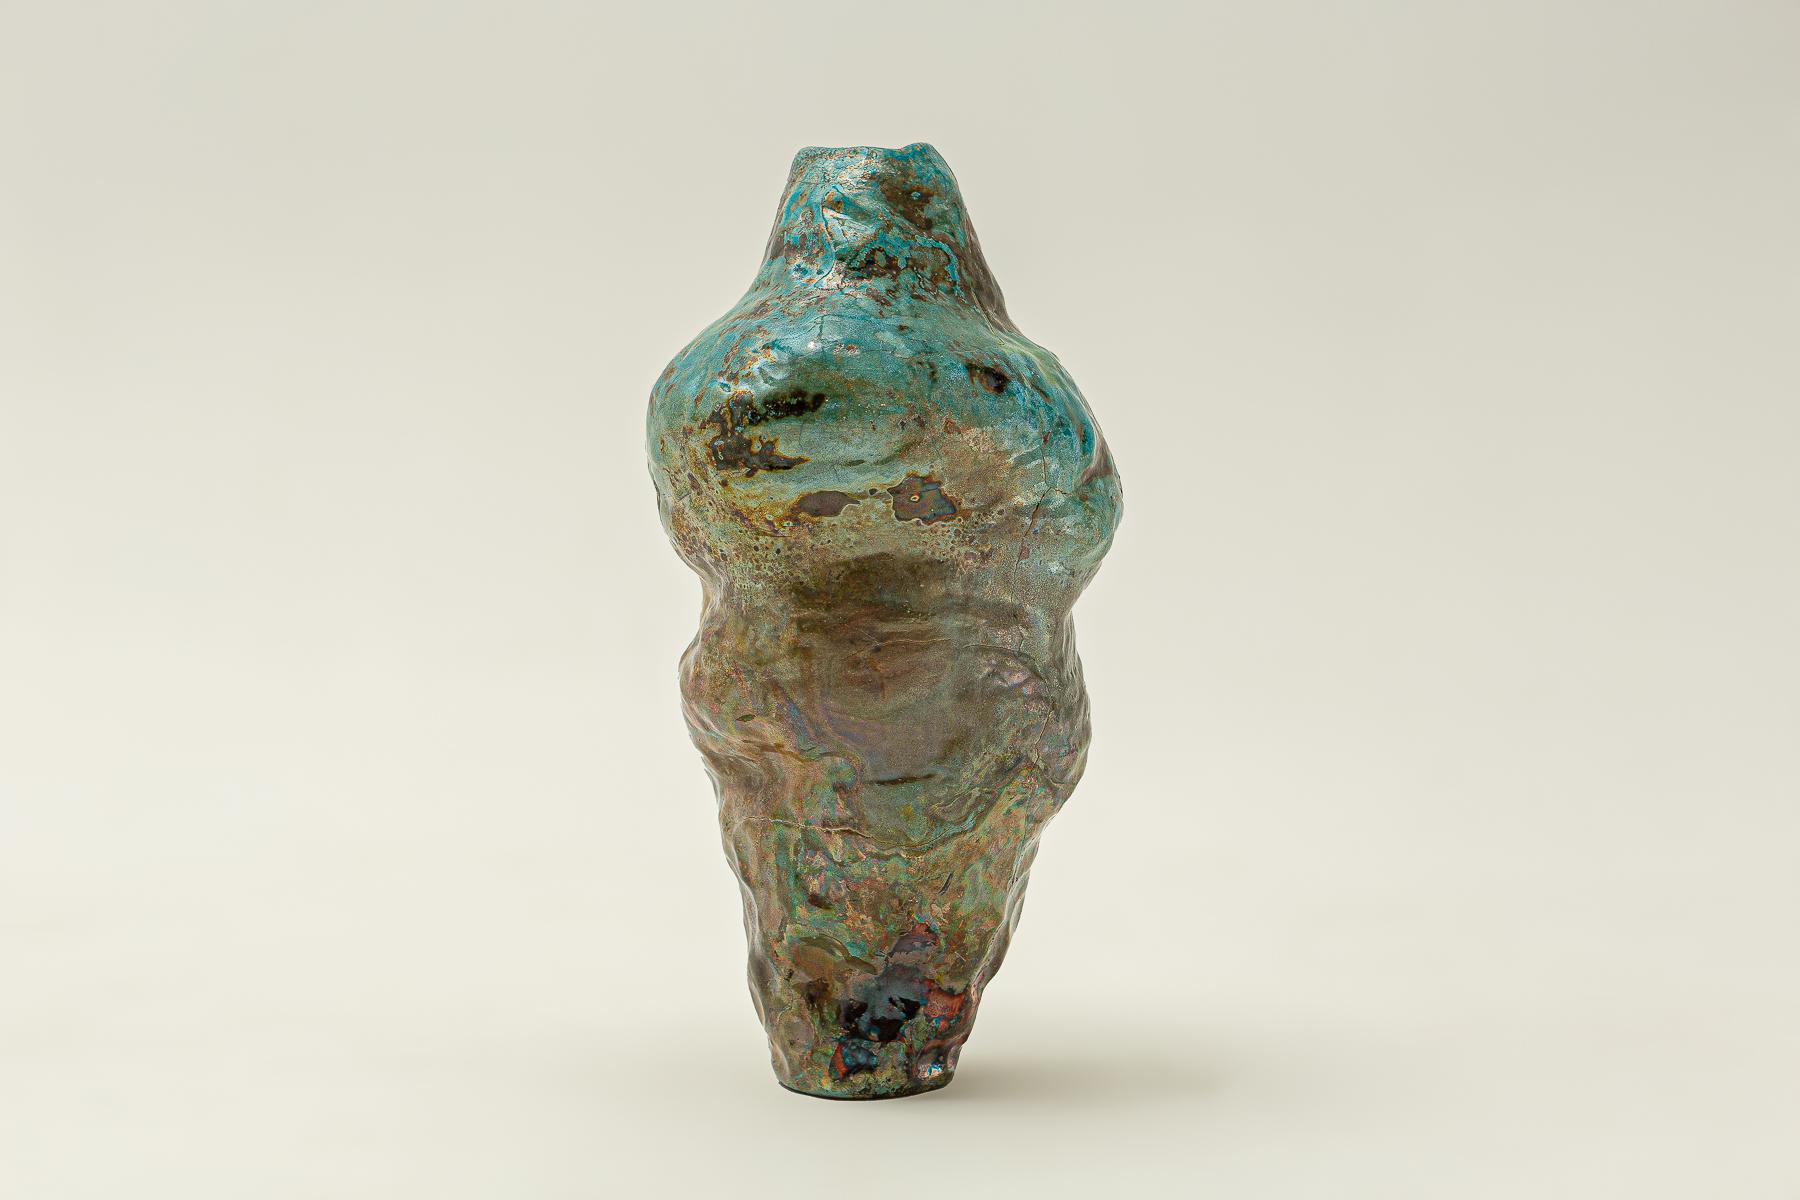 Hand formed, raku-fired stoneware vase. 
Dried flowers only. Raku ware is for decorative use only, and will not hold water.
Artist's signature on the bottom of the vase.